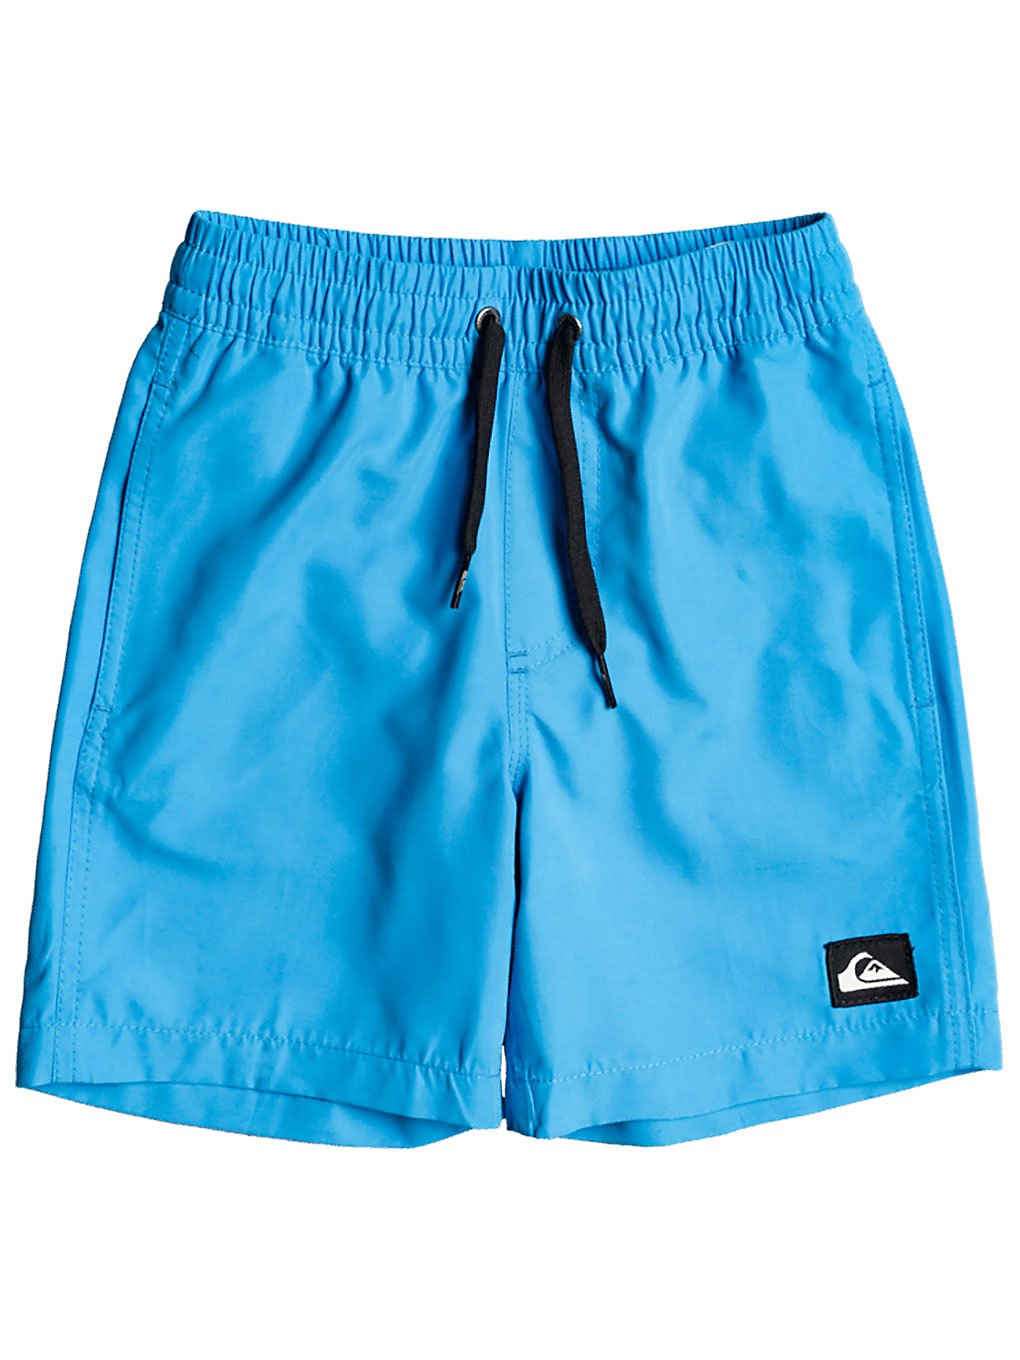 Quiksilver Everyday Volley 13 Boardshorts blithe